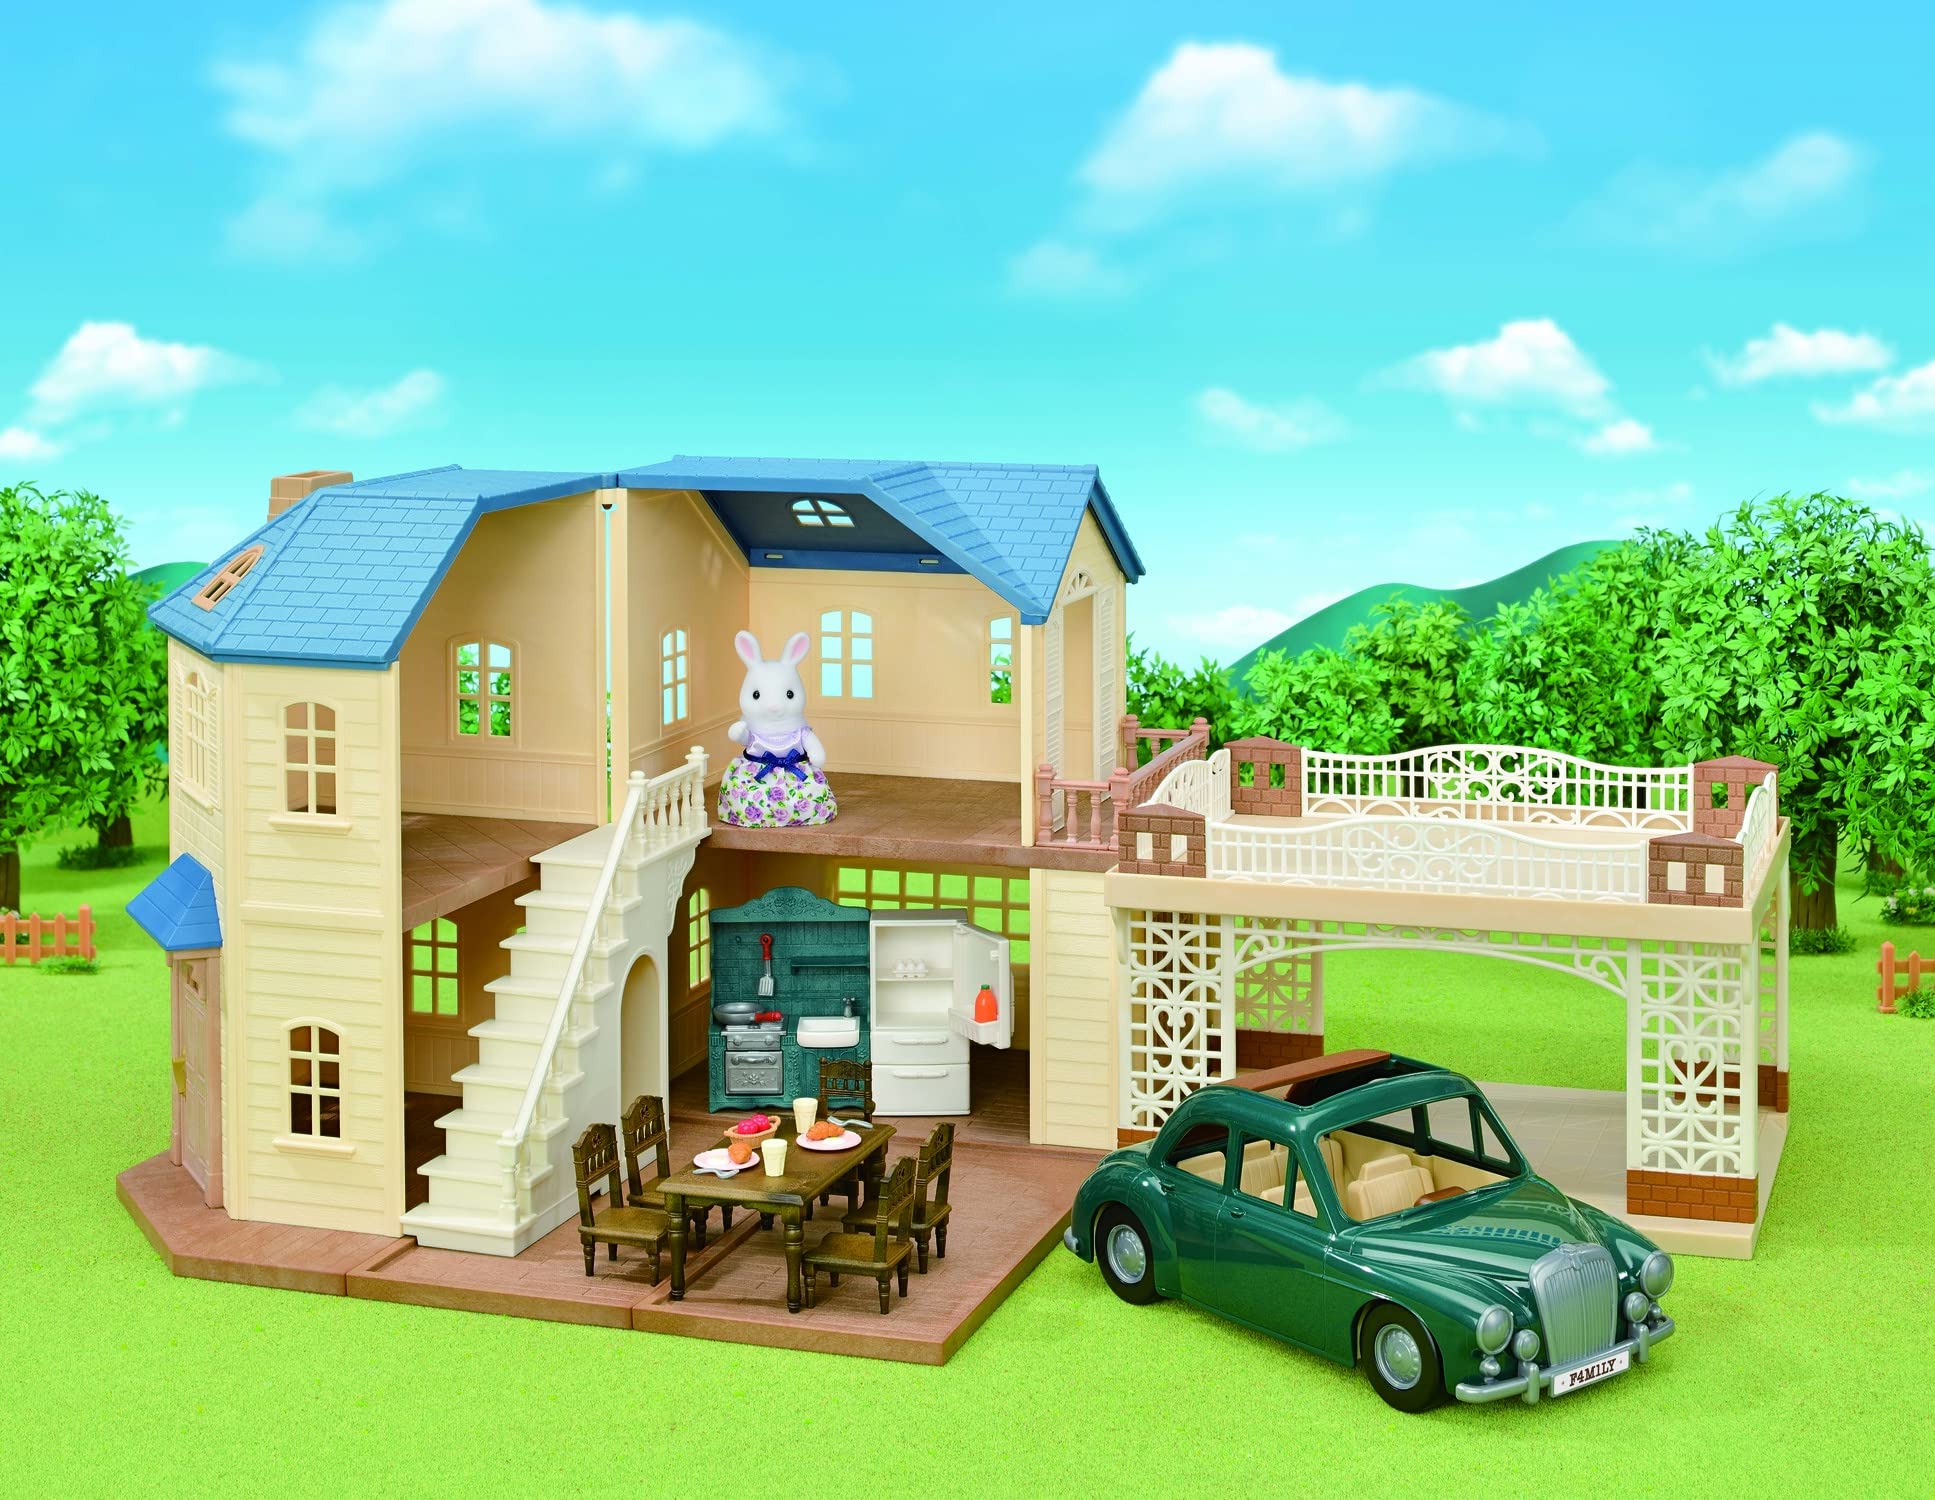 Calico Critters Large House with Carport Gift Set, Dollhouse Playset with Collectible Figure, Vehicle, Furniture and Accessories - Amazon Exclusive!